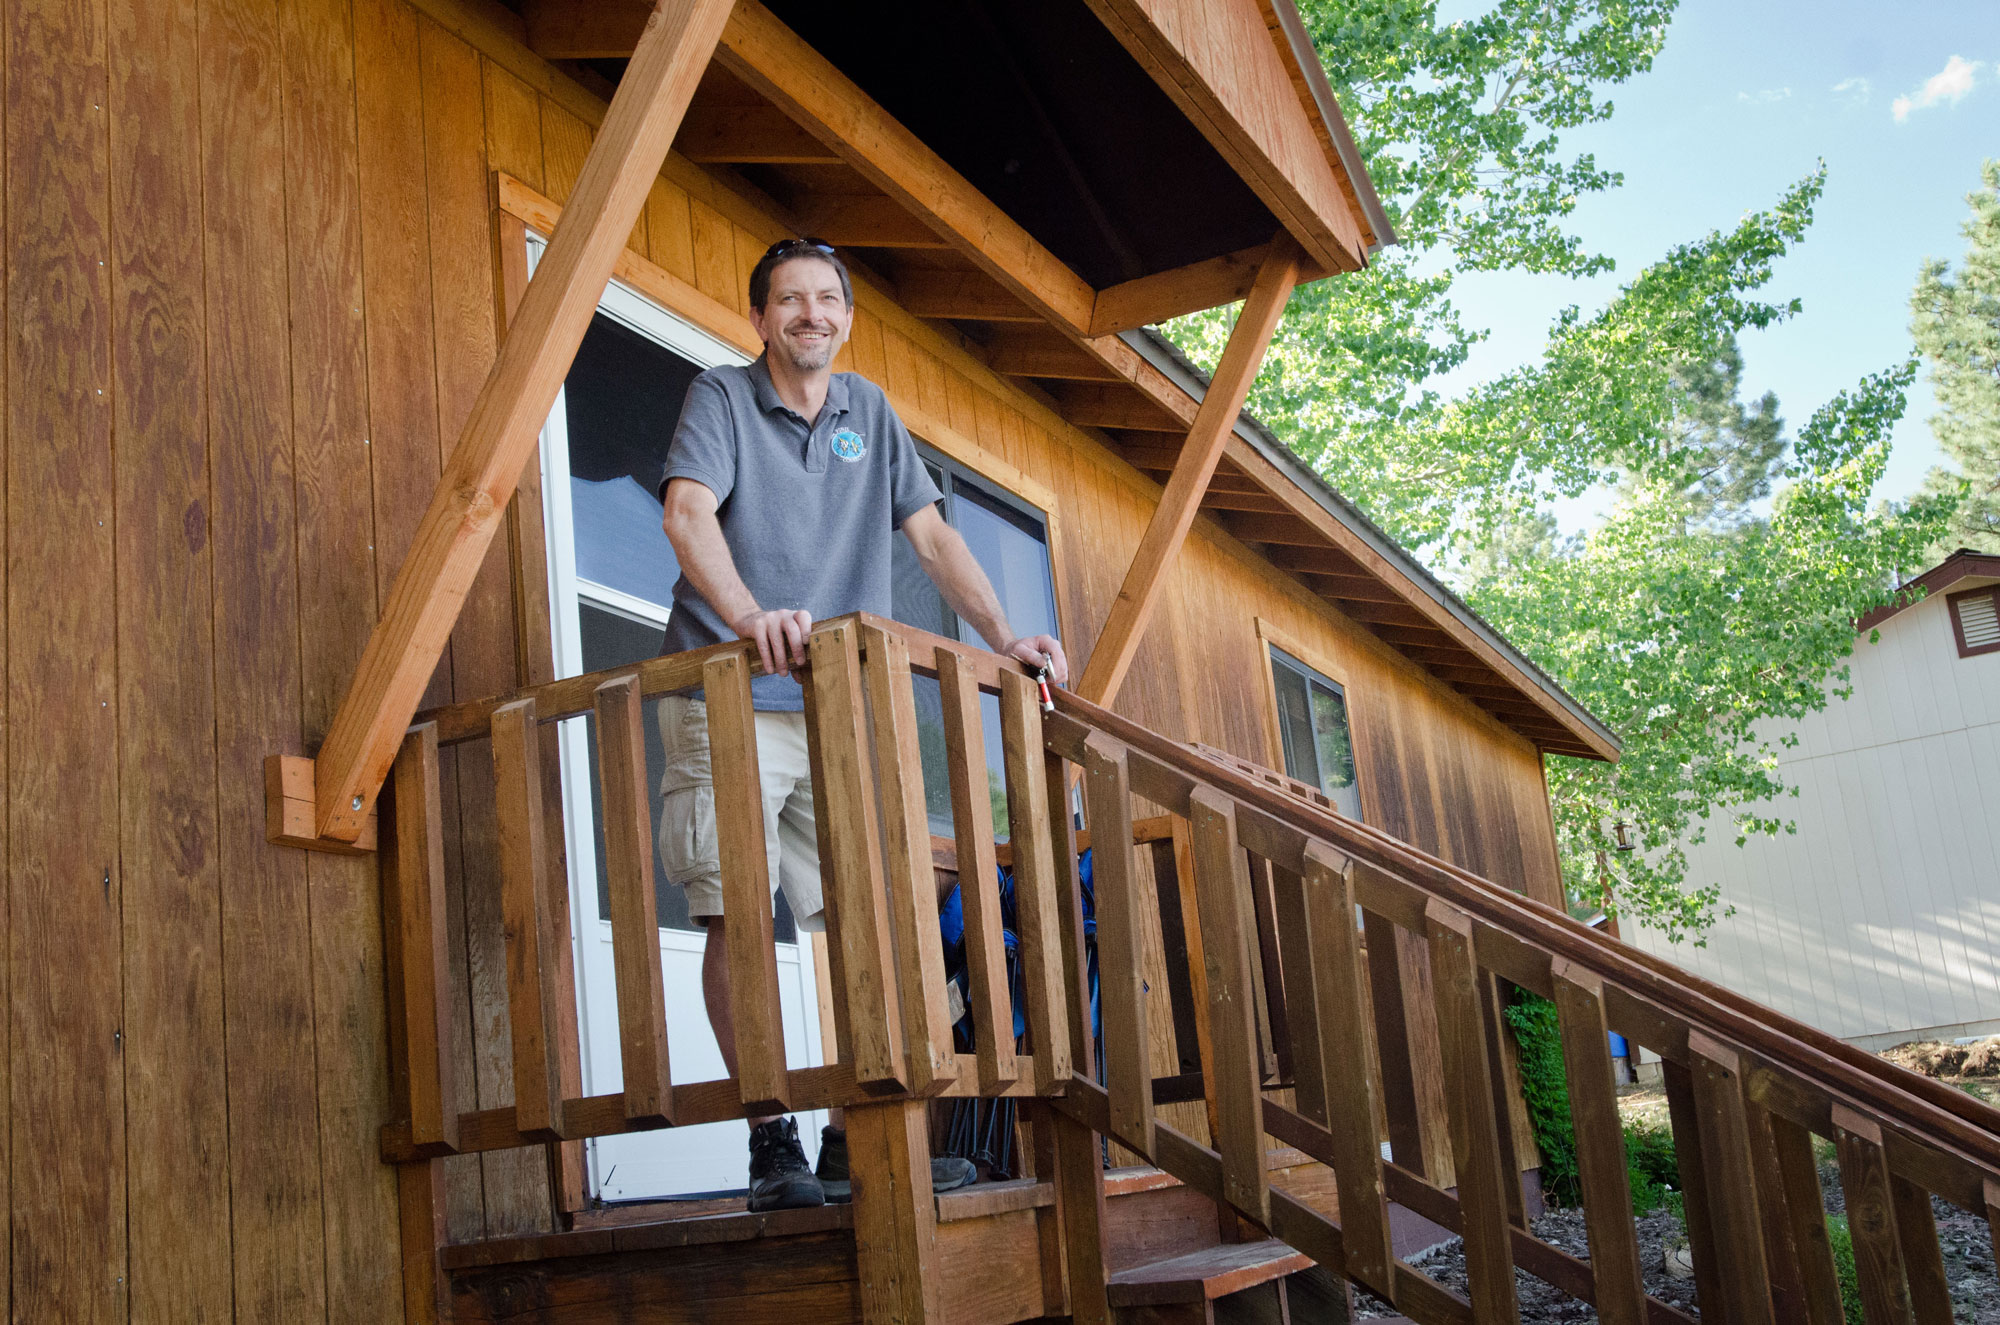 Colorado native and local business owner Bruce Longwell at his Durango, Colorado home on July 17, 2012